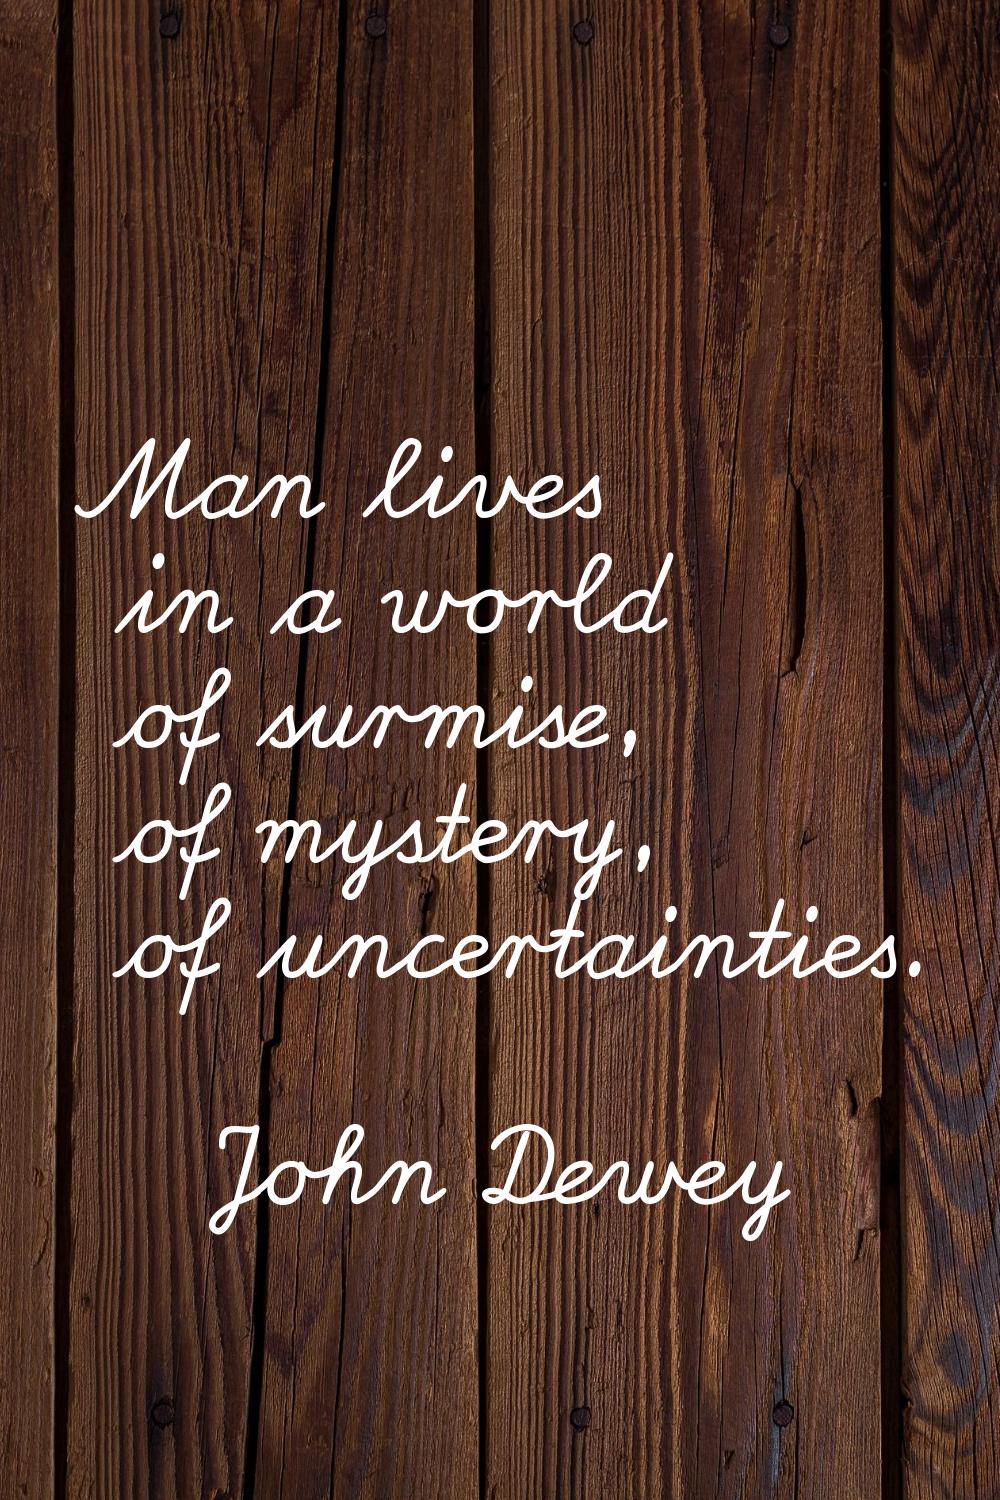 Man lives in a world of surmise, of mystery, of uncertainties.